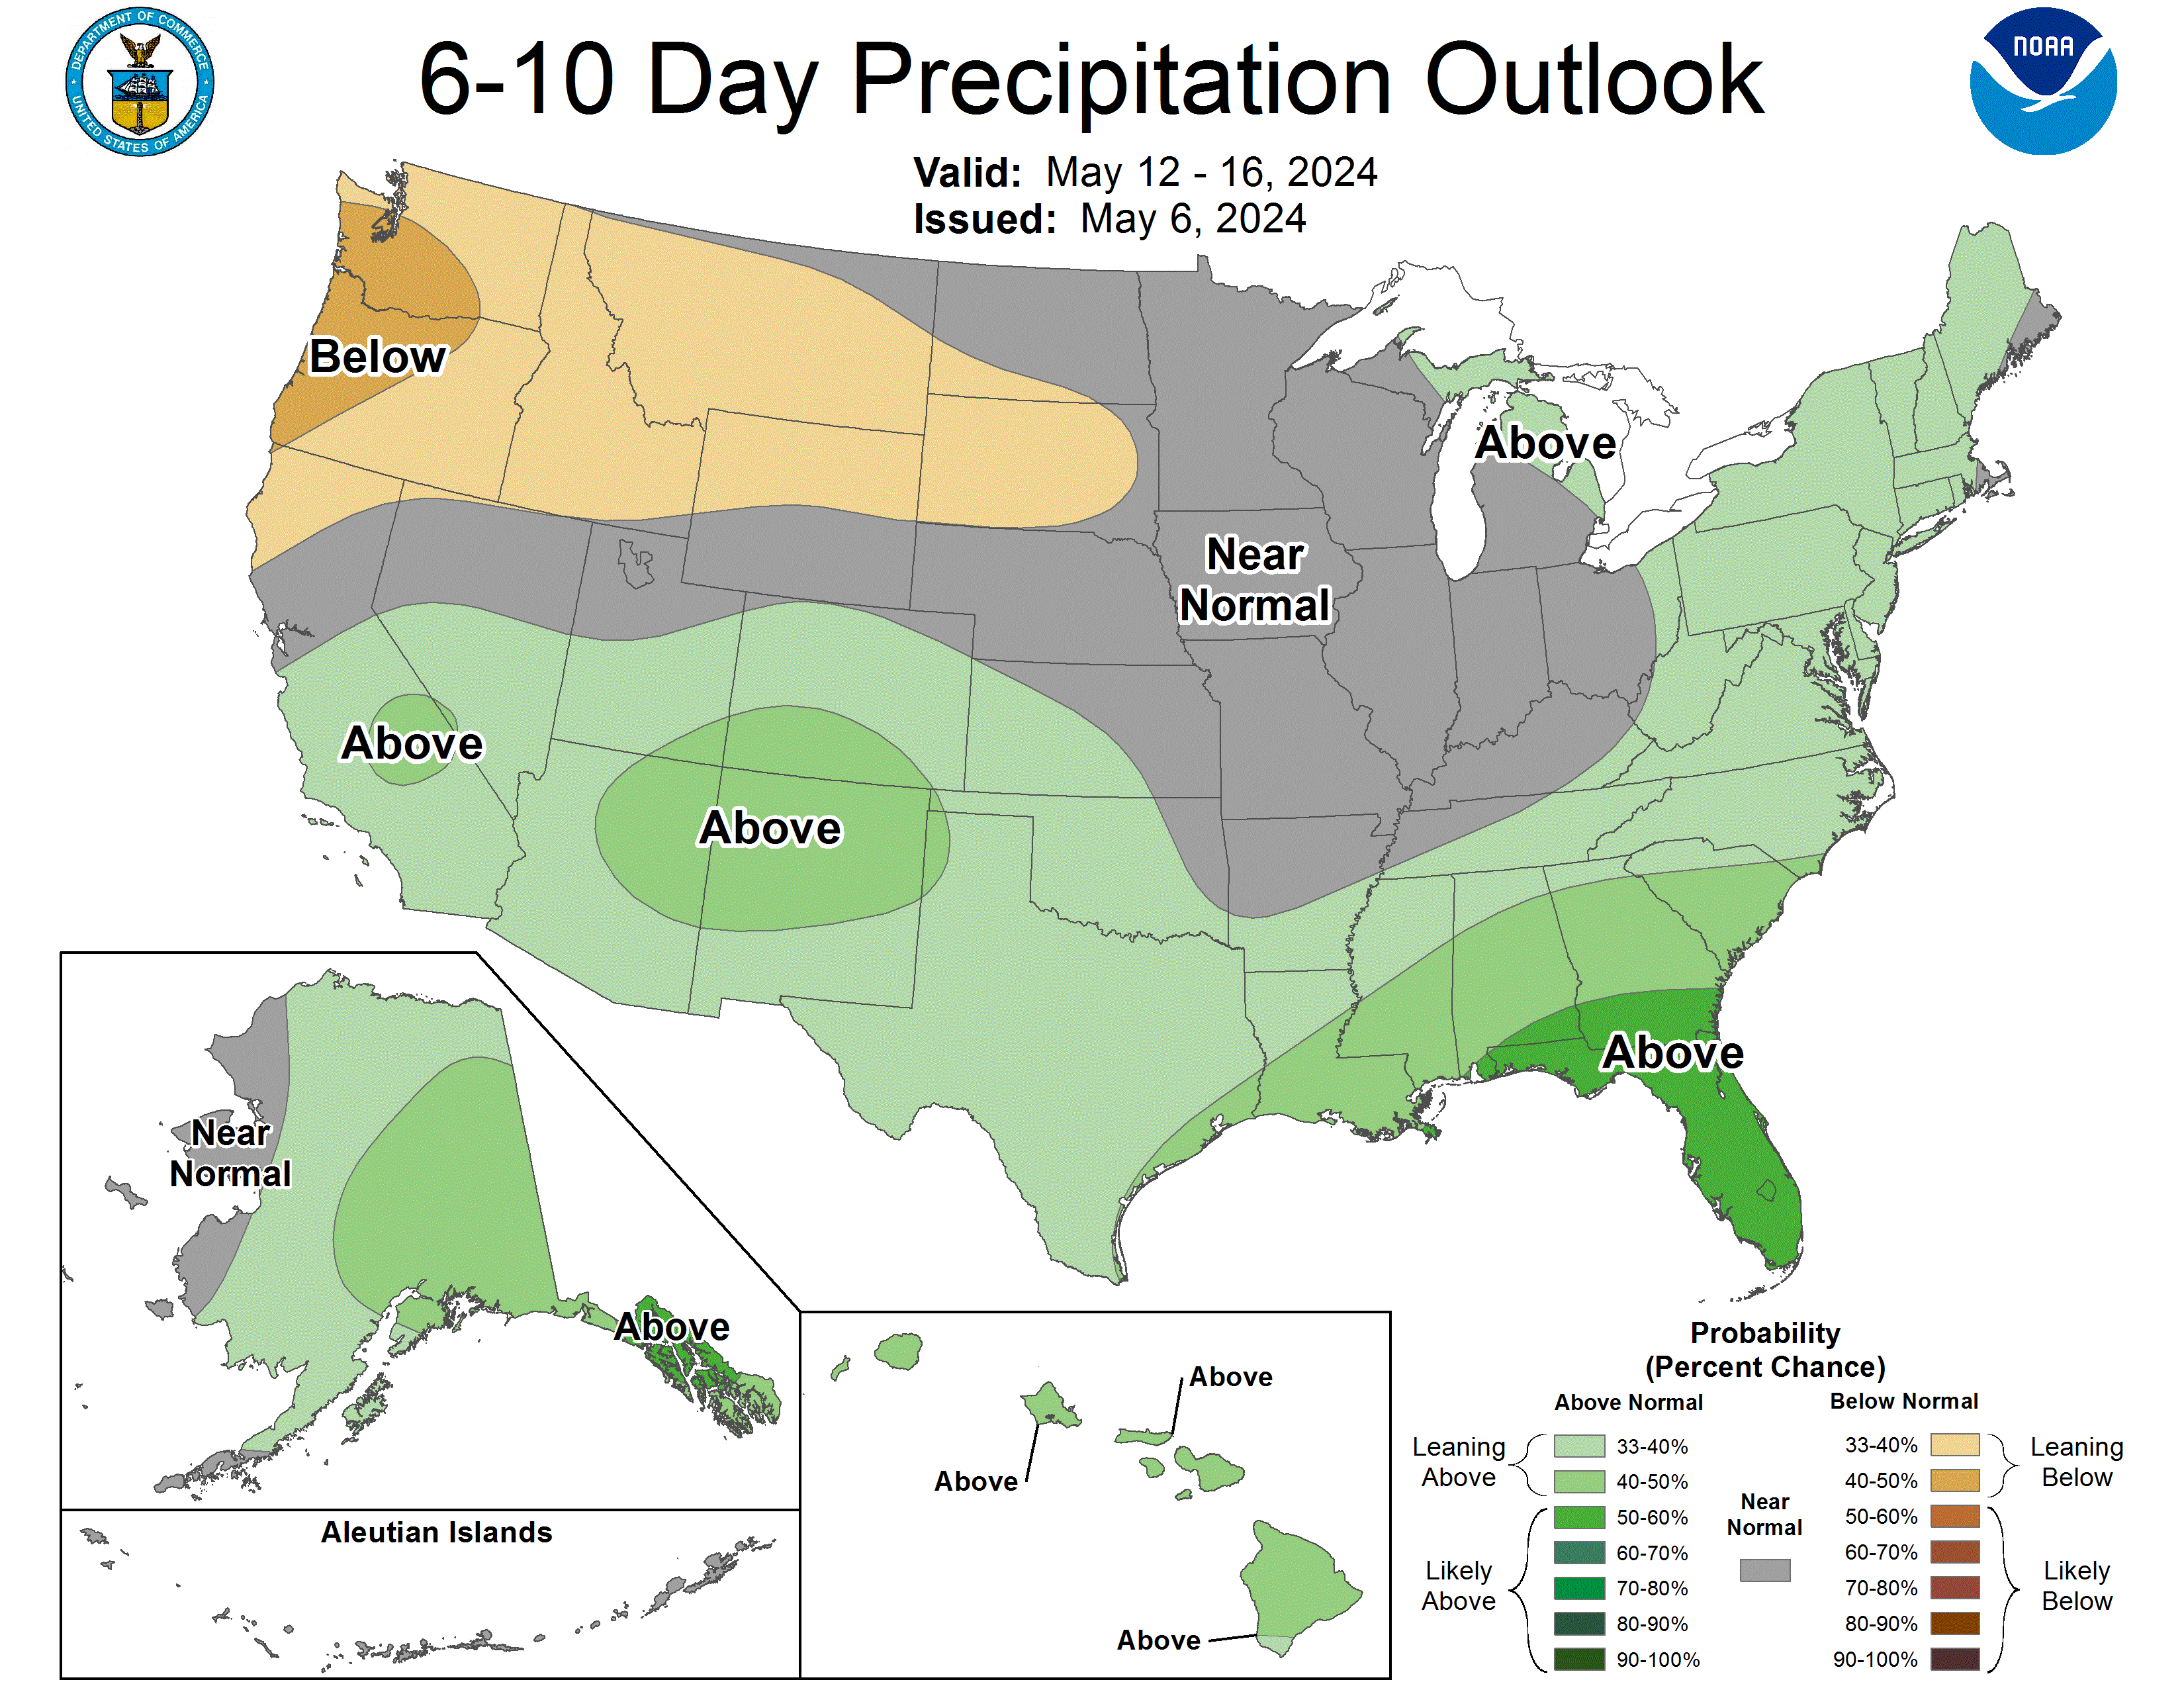 Map showing the precipitation outlook for days 6-10